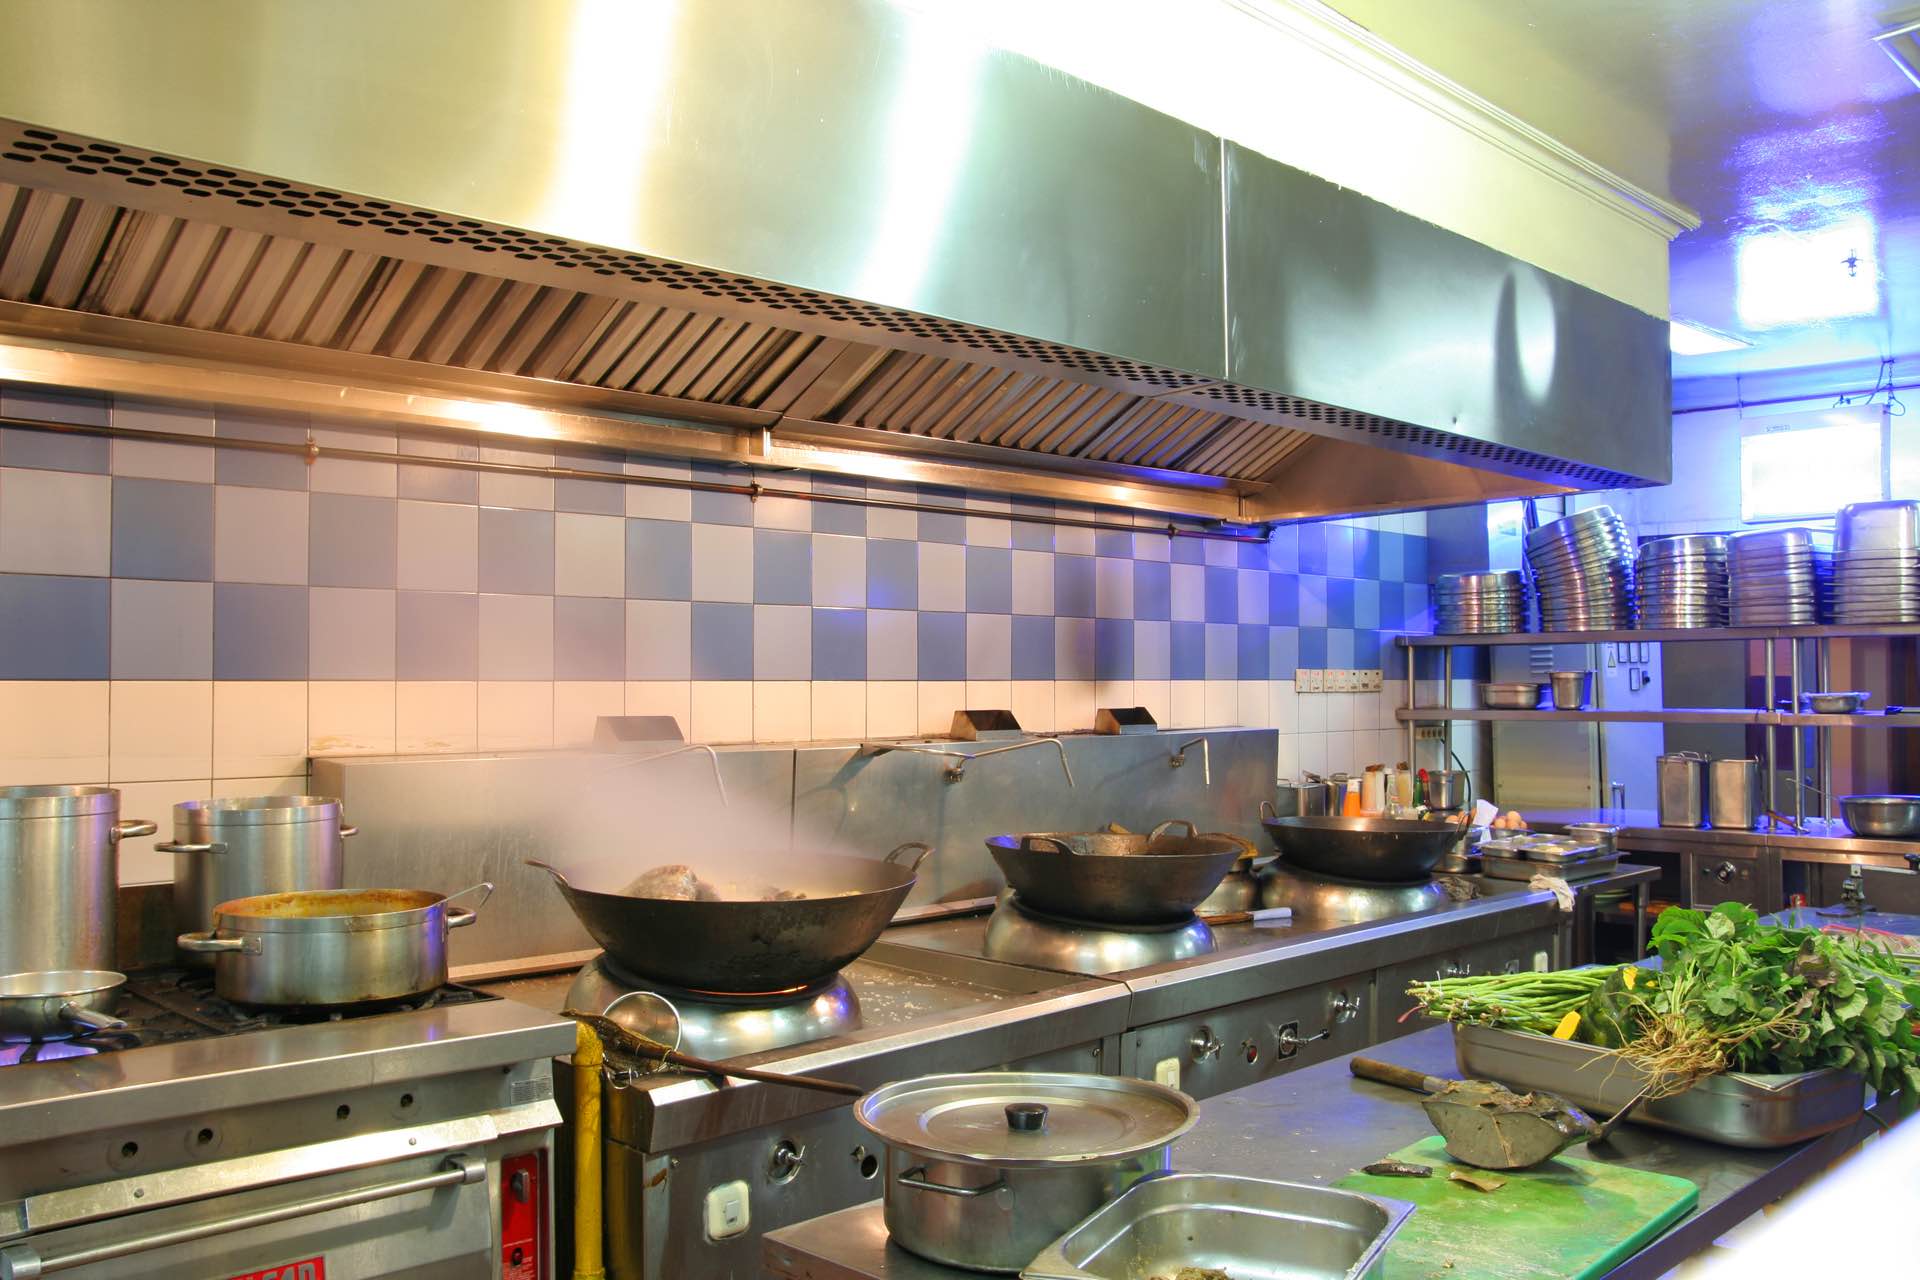 Choosing the Right Commercial Kitchen Exhaust Hood - Halo Restoration  Services